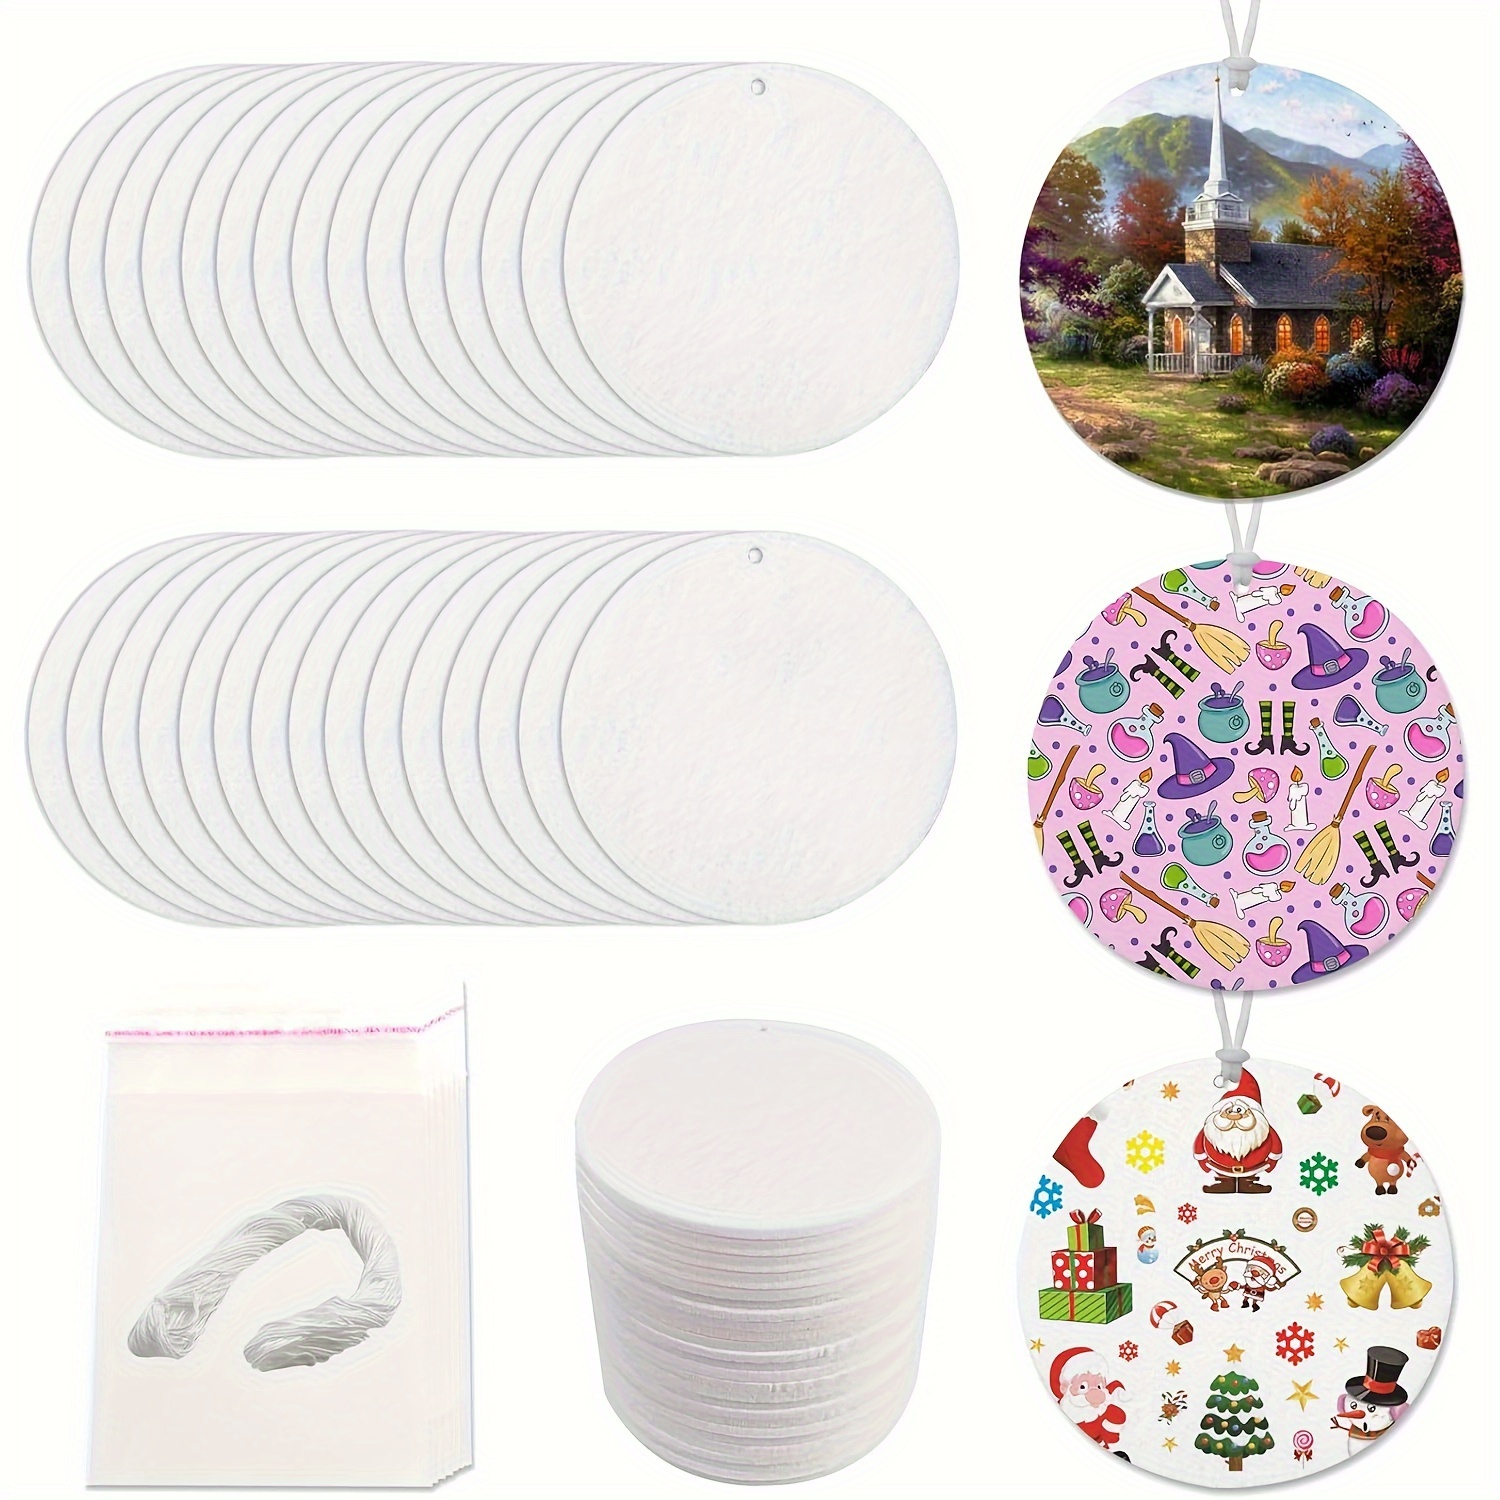 20/50pcs Sublimation Car Air Freshener Blanks, Car Hanging Accessories, DIY  Car Accessories Crafts White Sheets With Elastic Strings